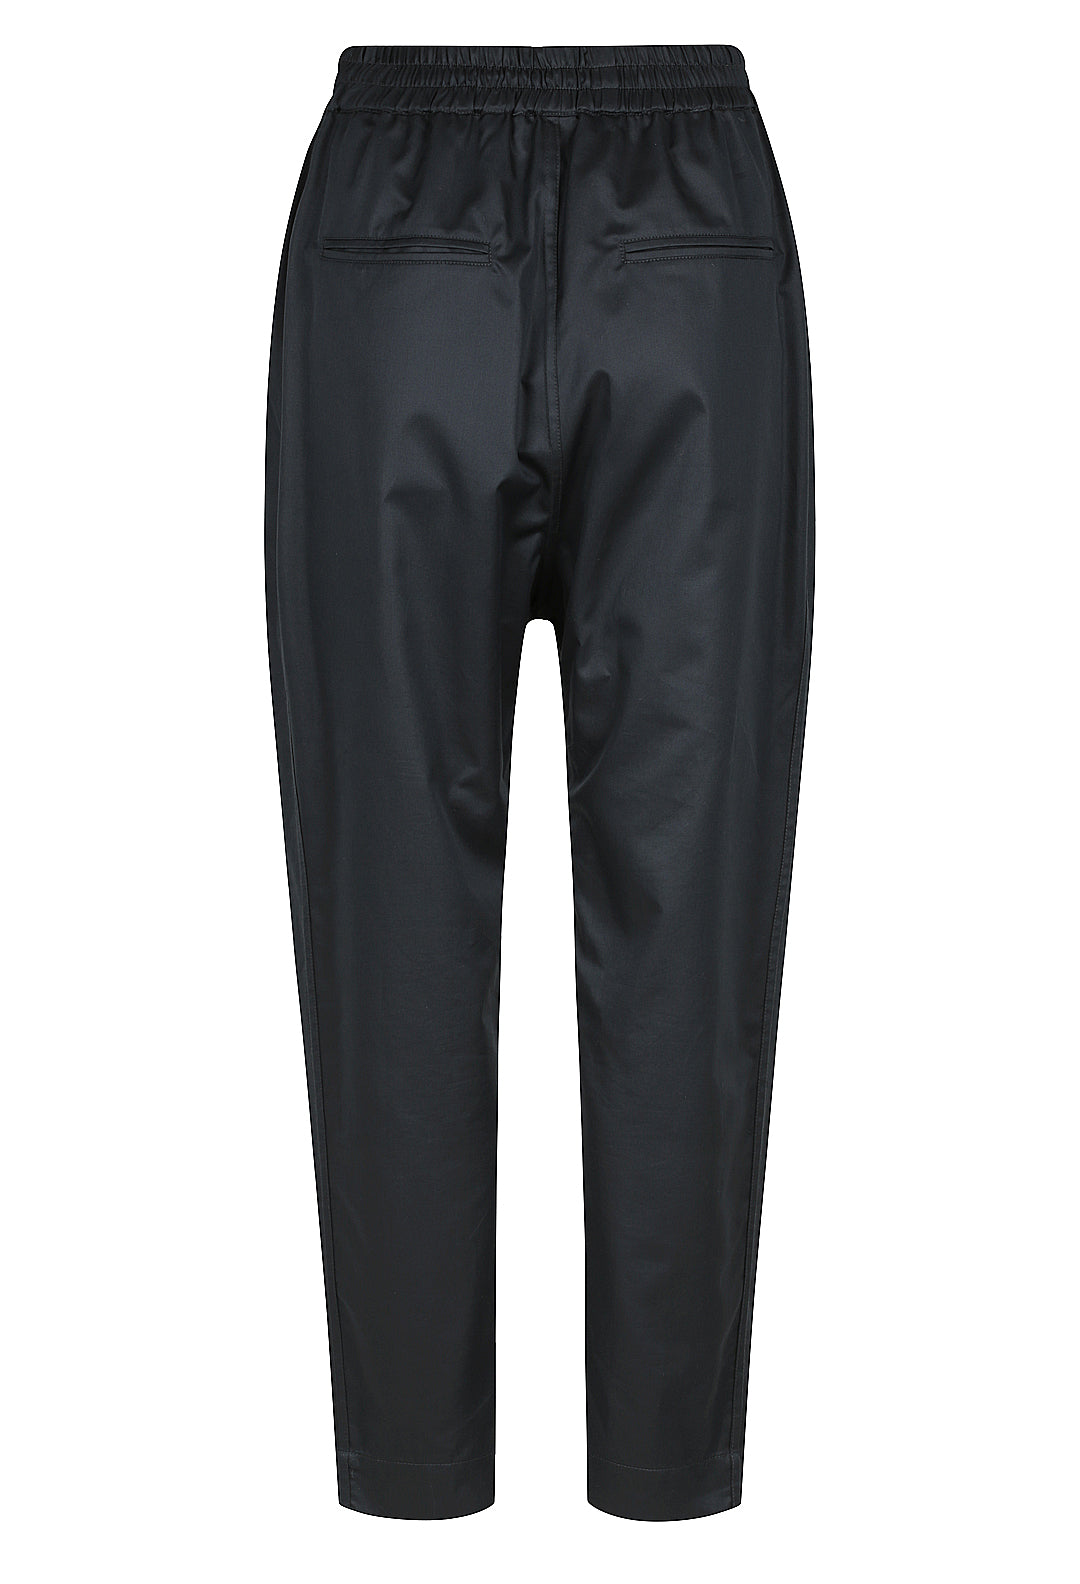 Relaxed Twill Pant